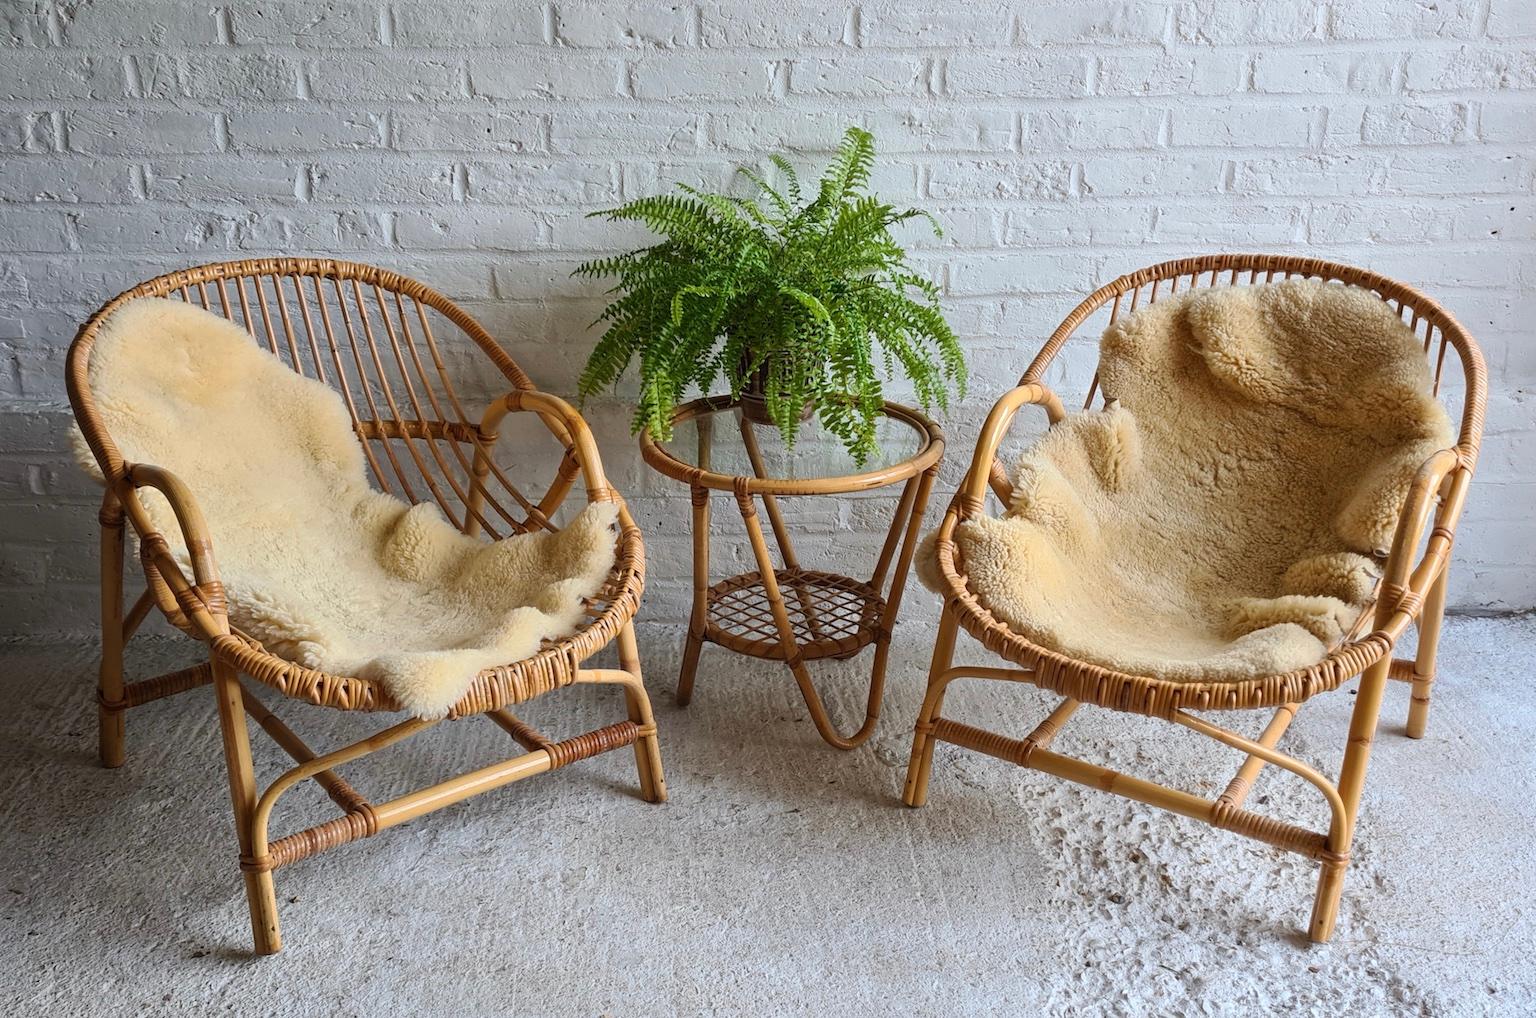 Pair of midcentury rattan / cane armchairs by Angraves, England, 1970s

A pair of rattan lounge armchairs. Made by English company ‘Angraves’ of Brook St, Leicester, part of their “Invincible” range

These stunning rattan chairs are both